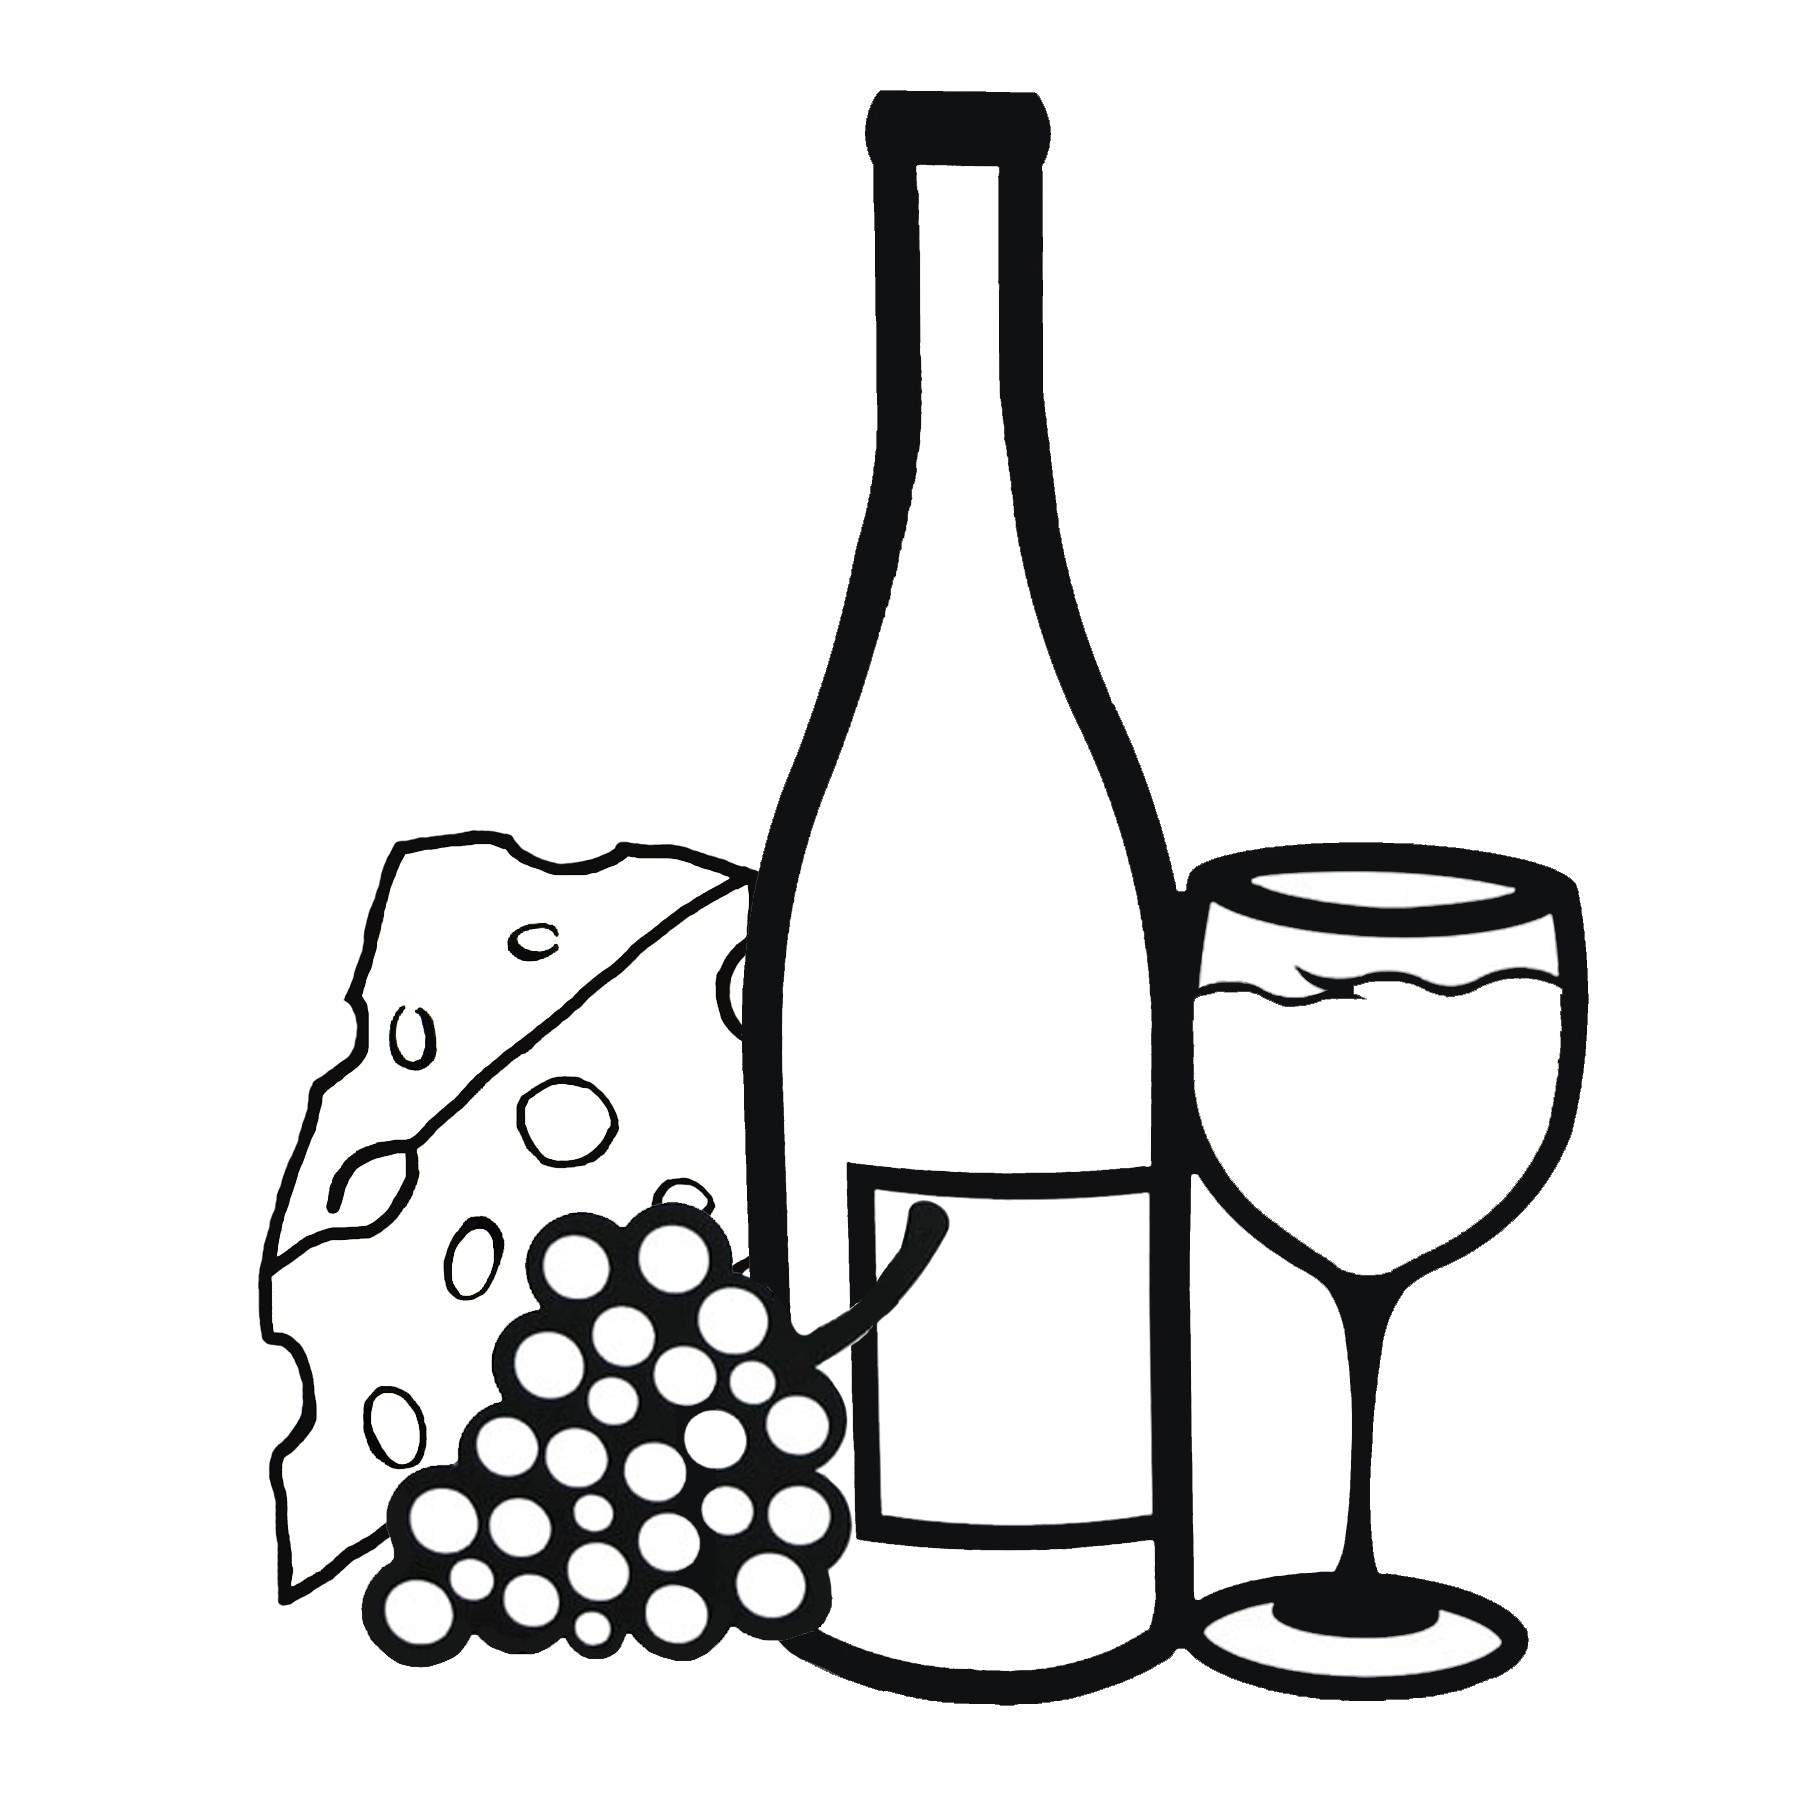 Clipart wine bottle and glass